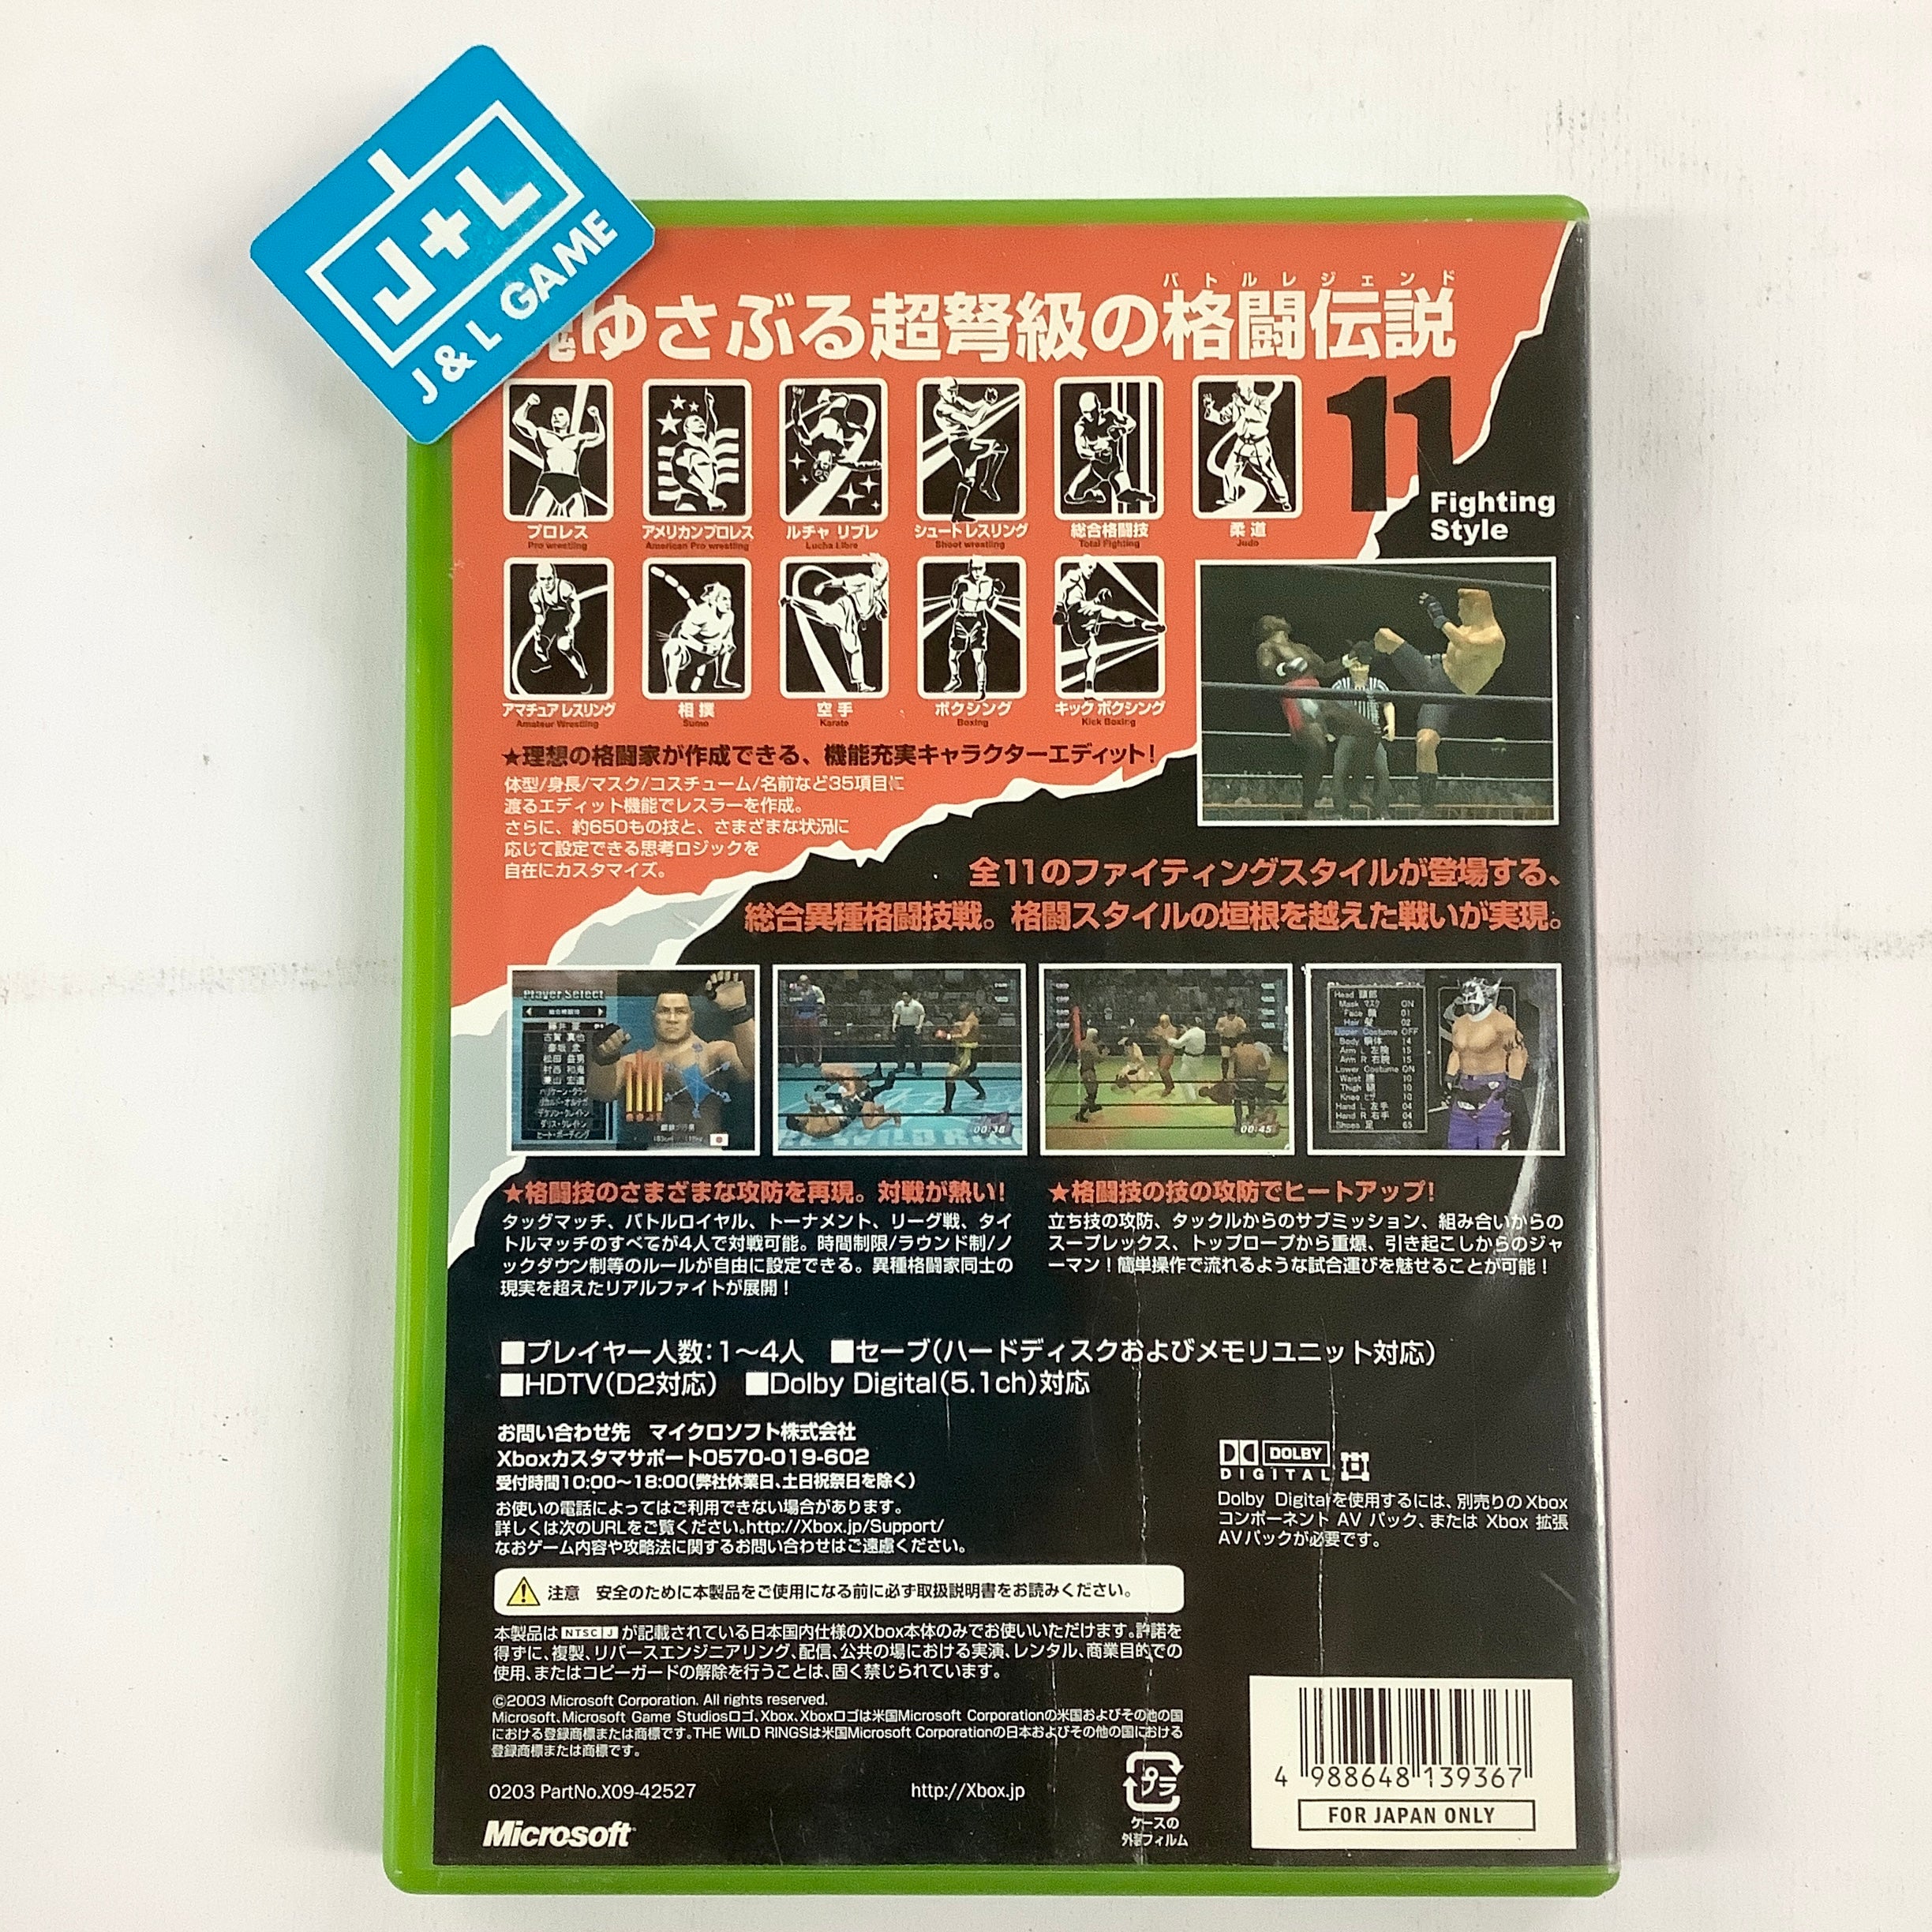 The Wild Rings - (XB) Xbox [Pre-Owned] (Japanese Import) Video Games Microsoft Game Studios   